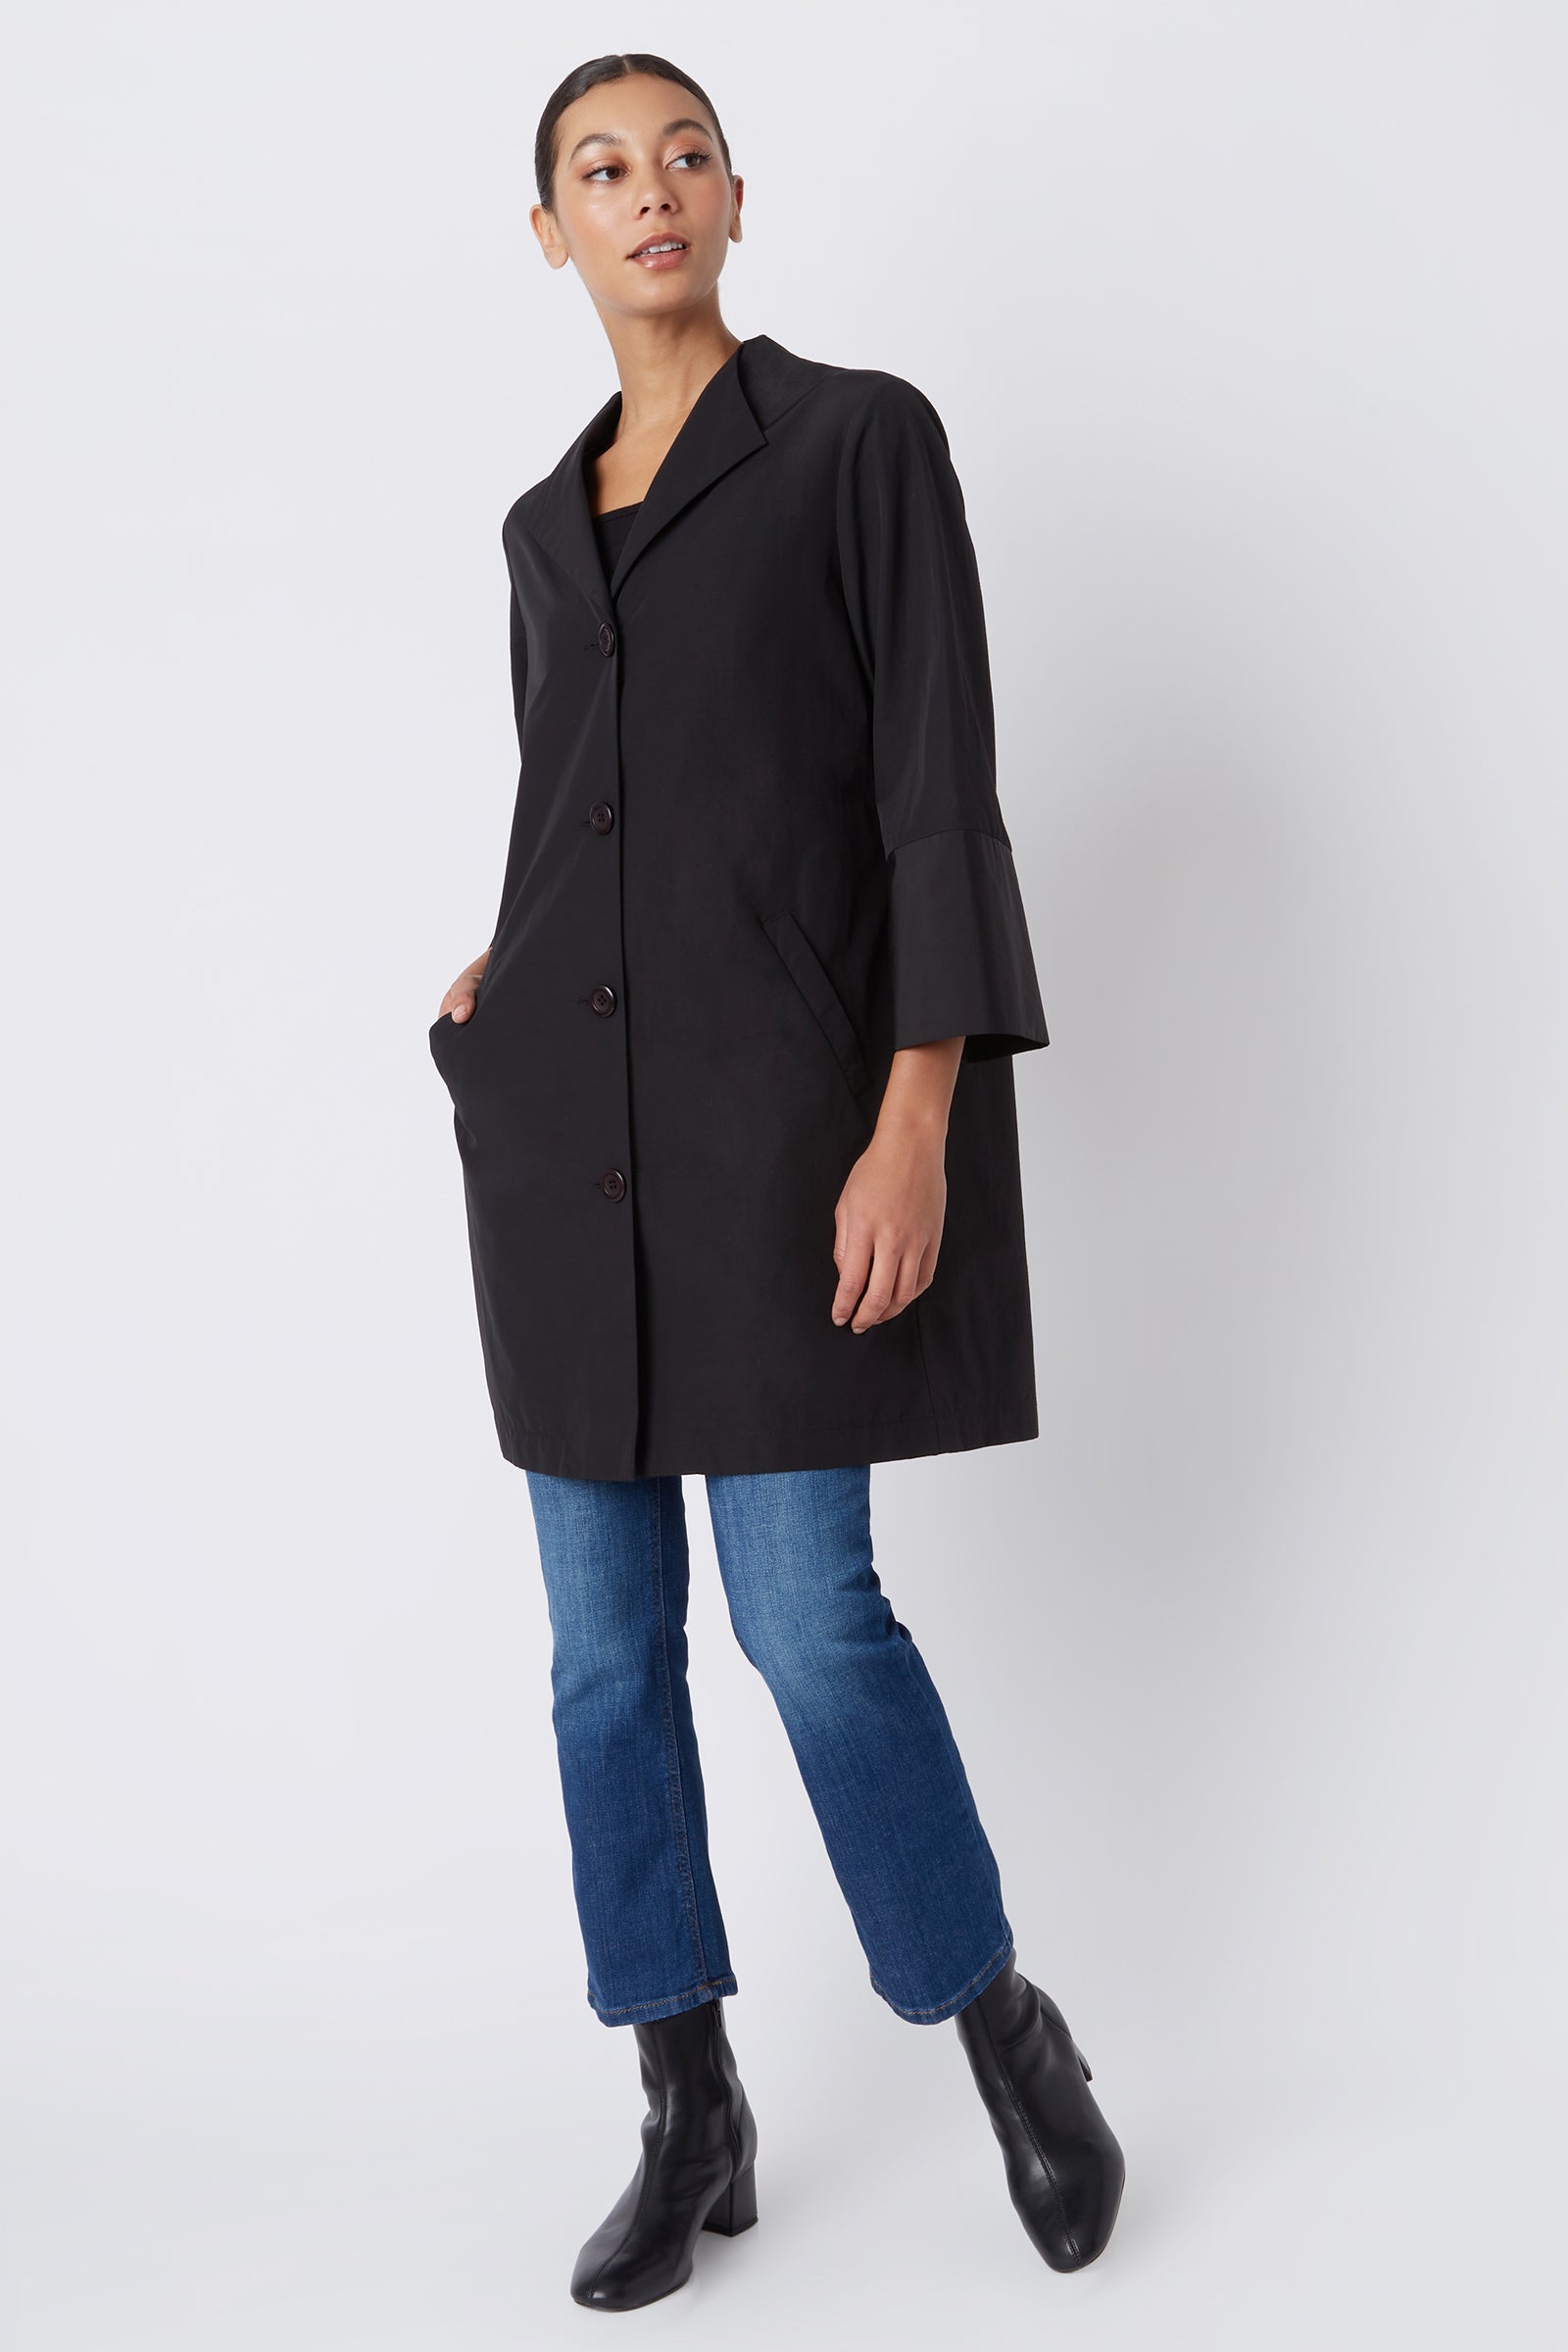 Kal Rieman Else Peacoat in Black Italian Broadcloth on Model with Hand in Pocket Full Front View